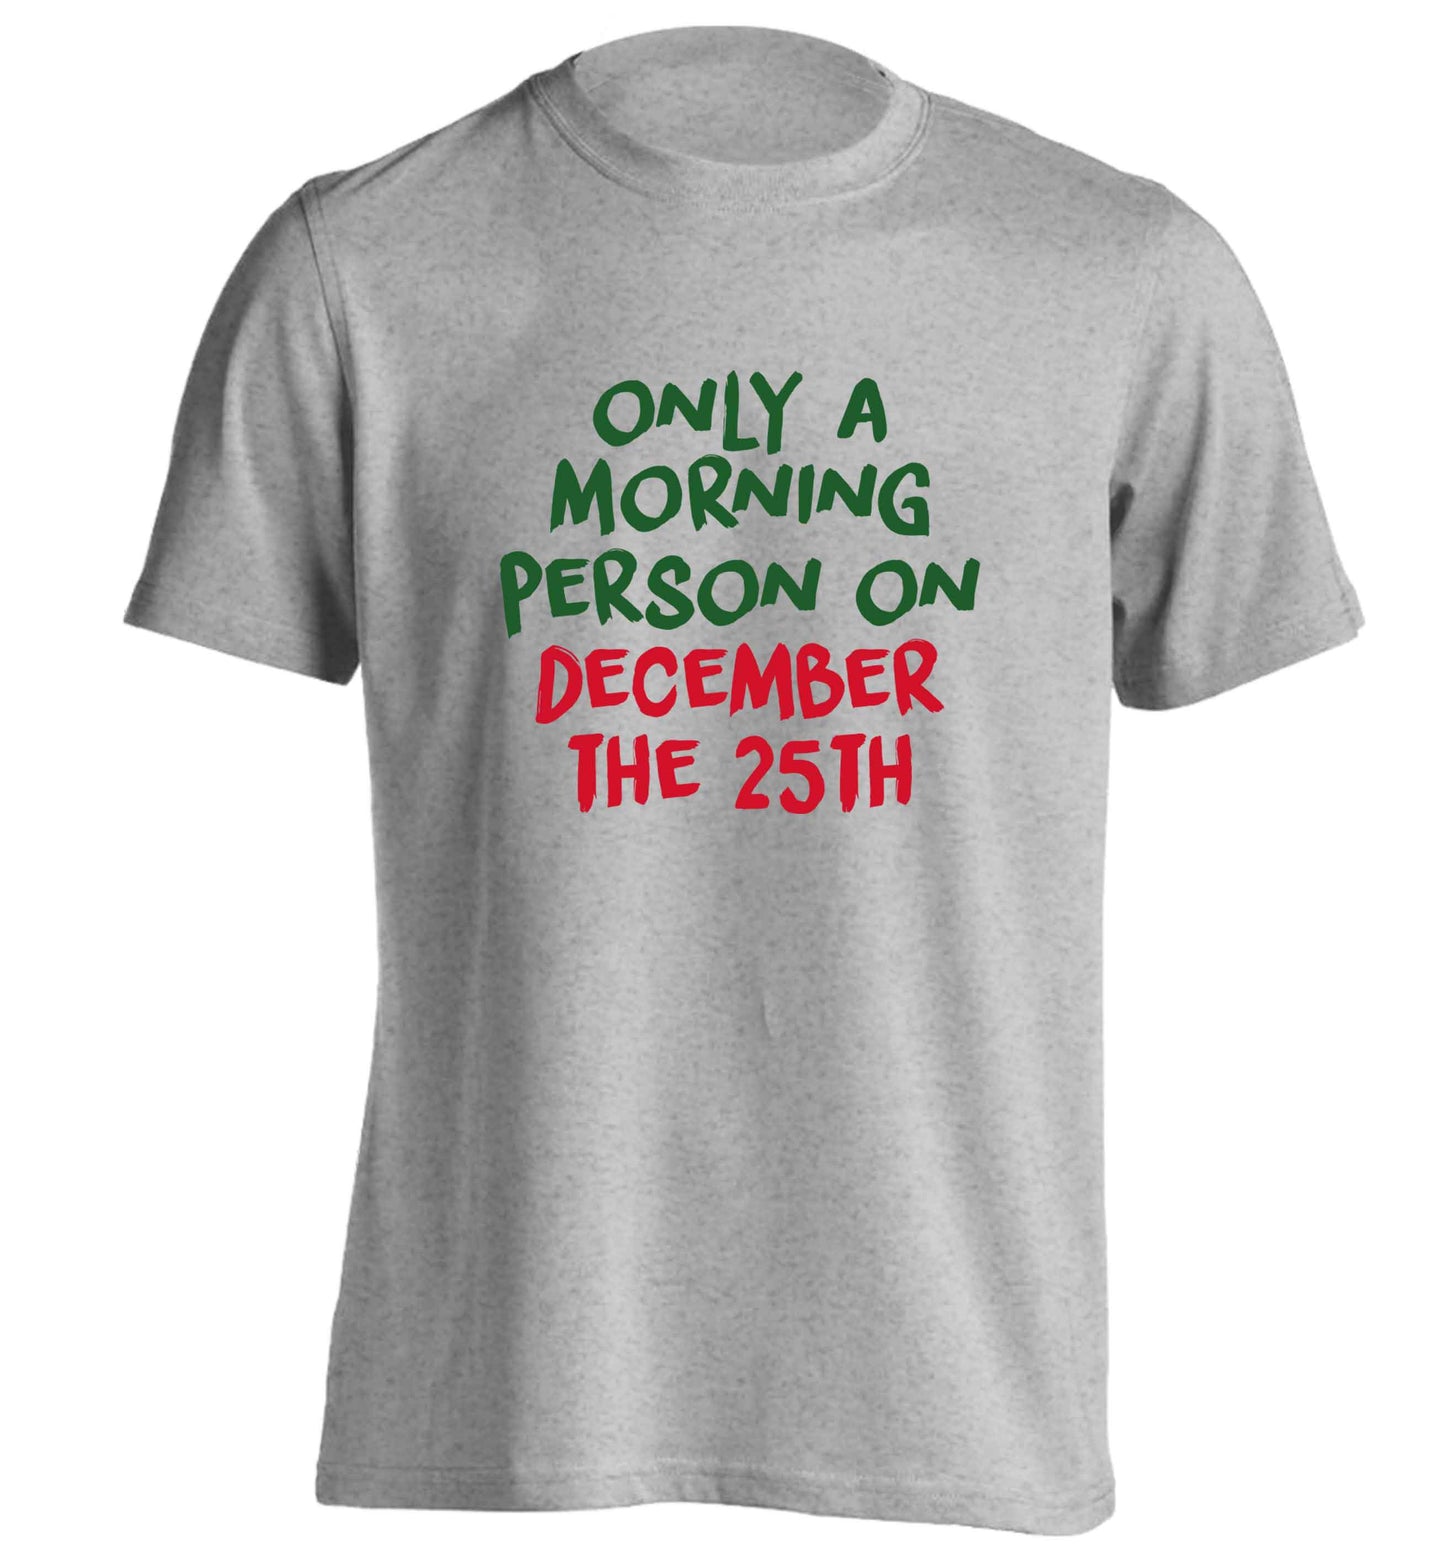 I'm only a morning person on December the 25th adults unisex grey Tshirt 2XL